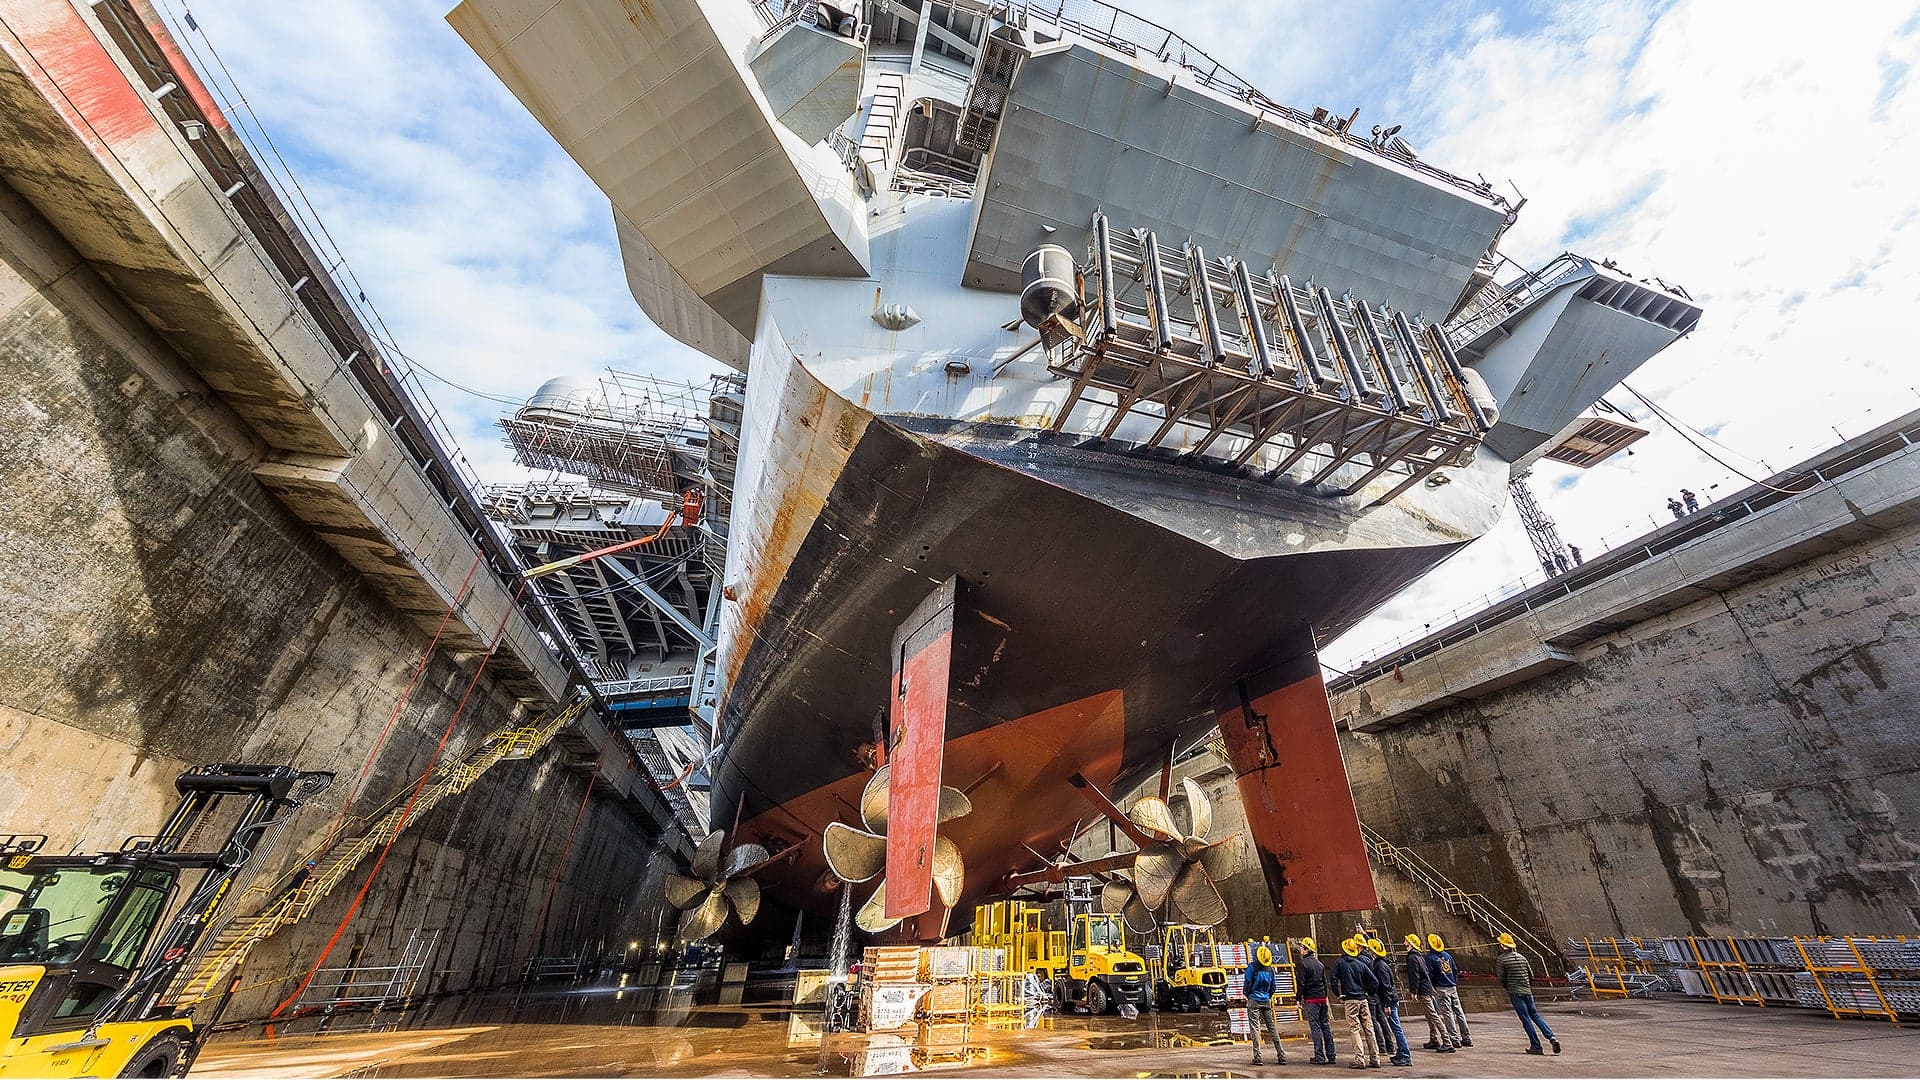 Awe-Inspiring Images From Underneath A Well-Worn USS Nimitz, The Navy’s Oldest Carrier